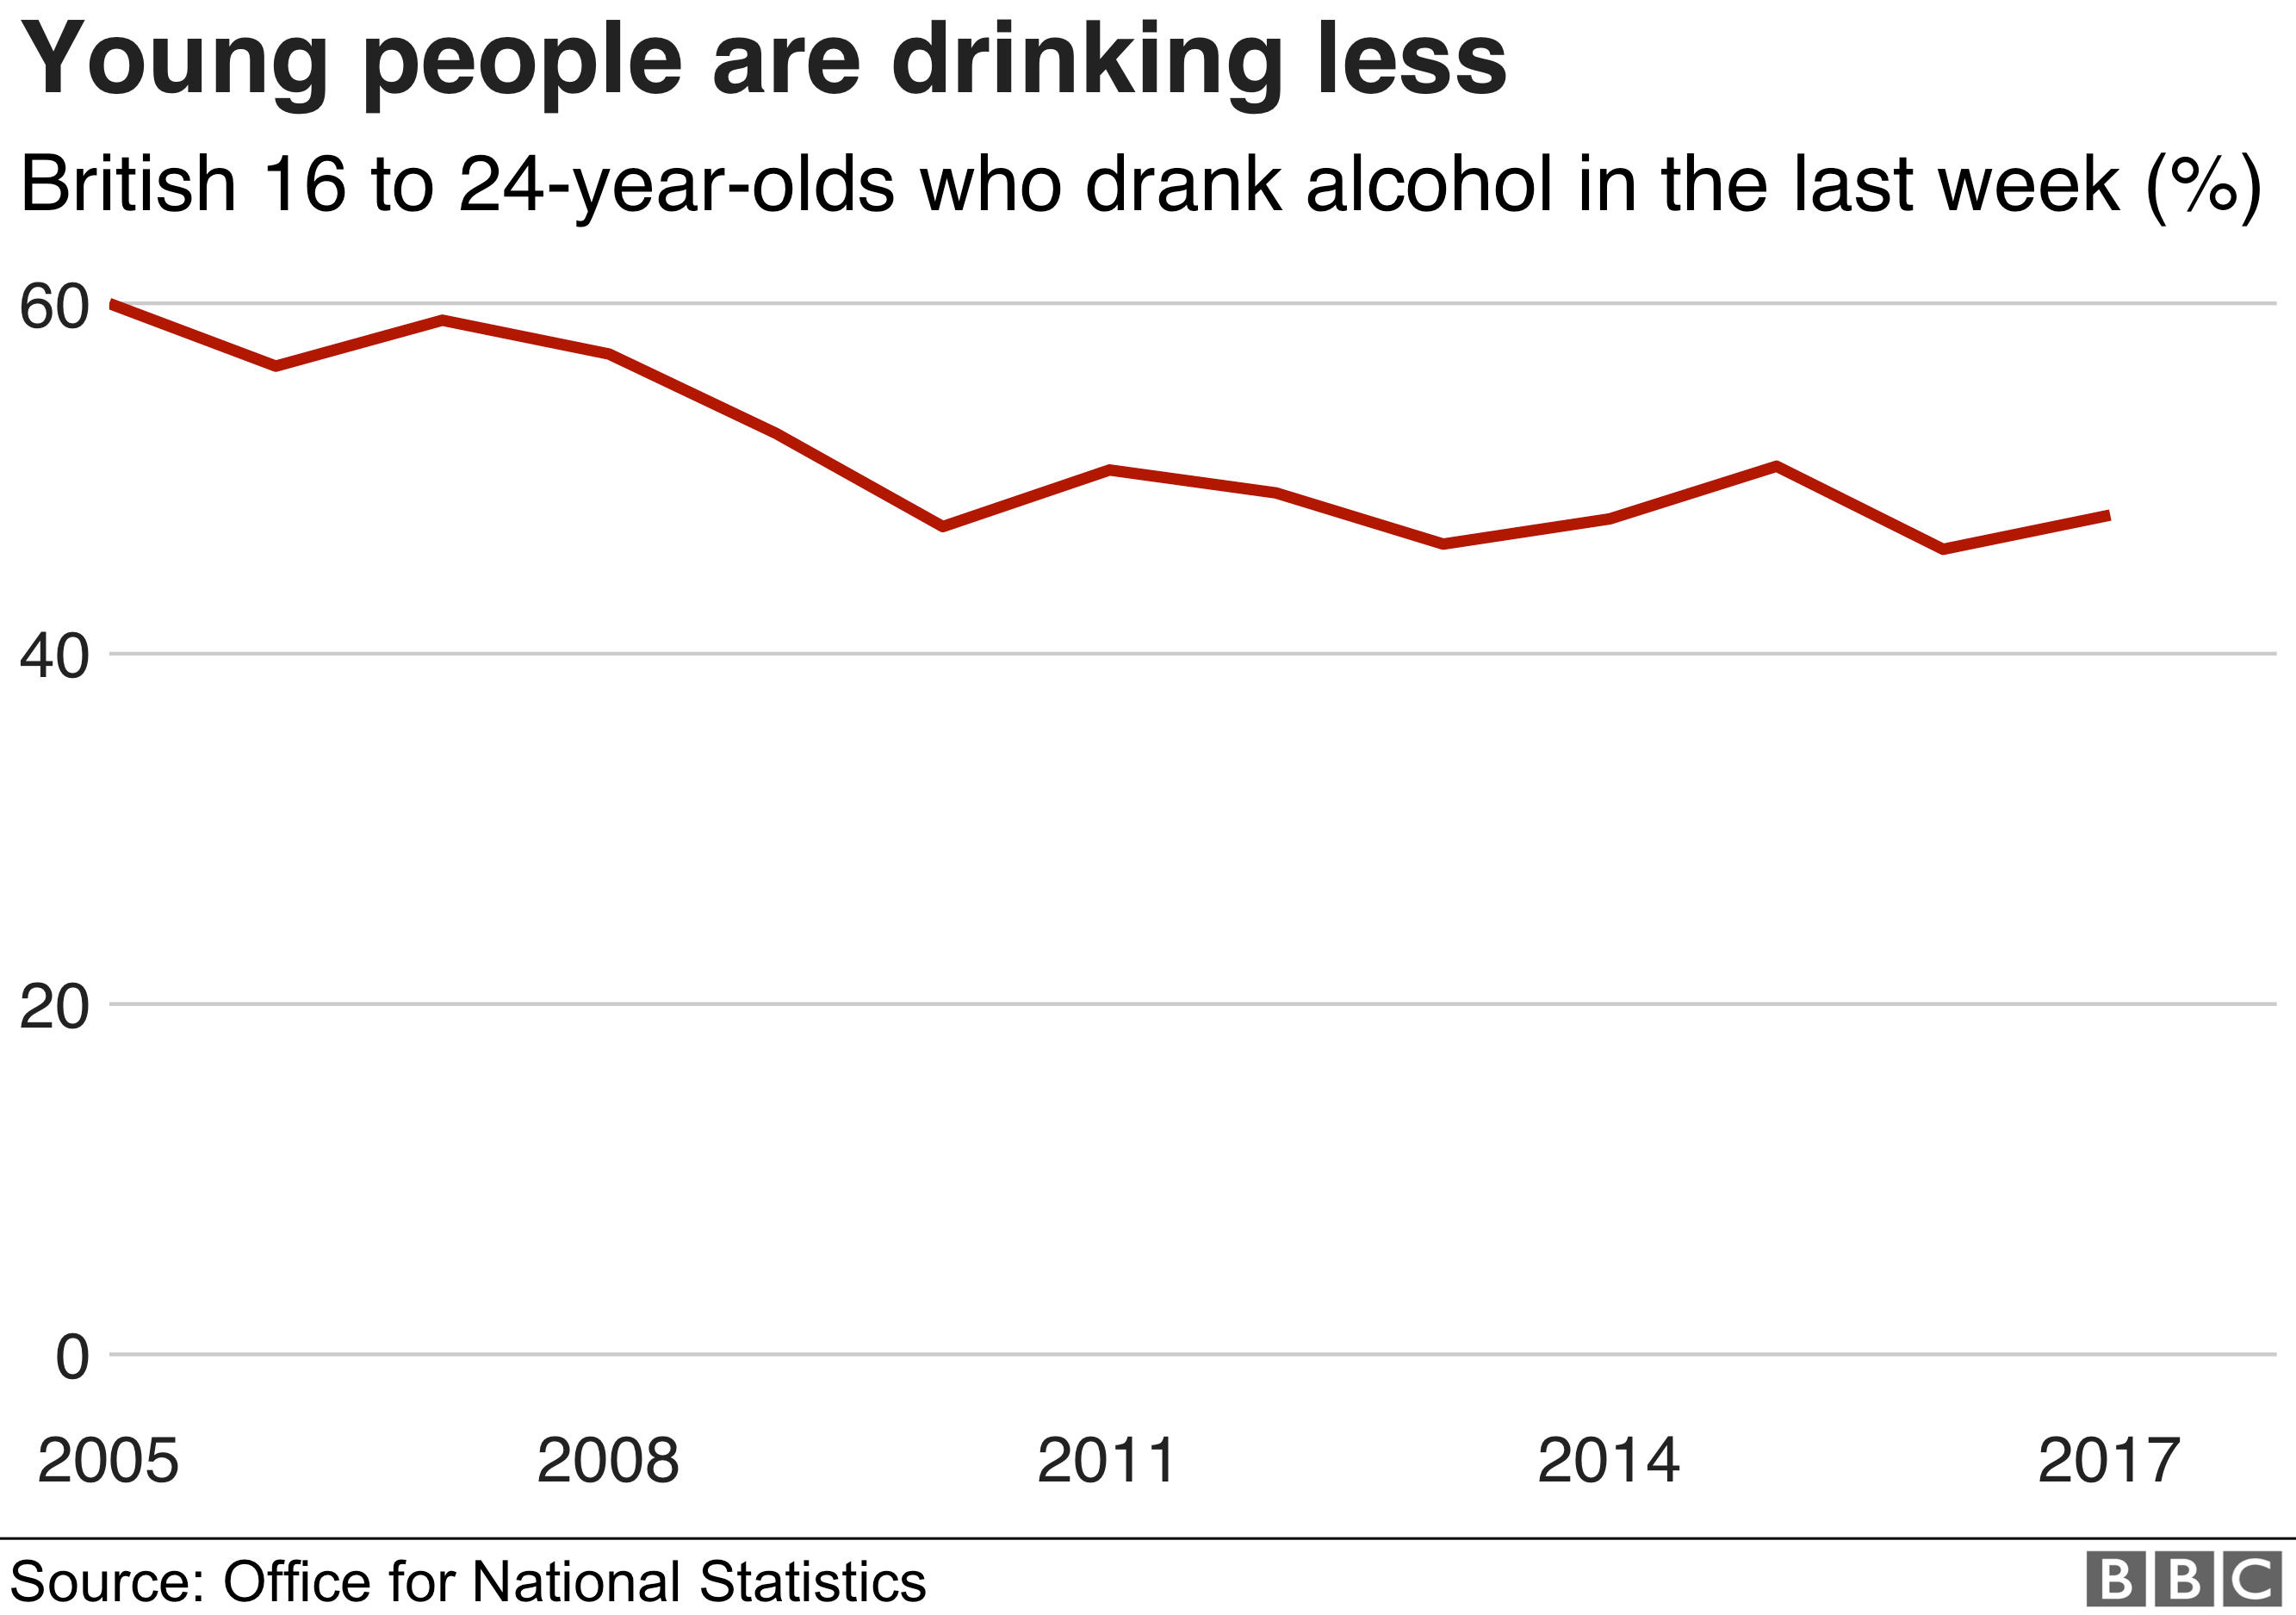 Chart showing the decline of youth drinking